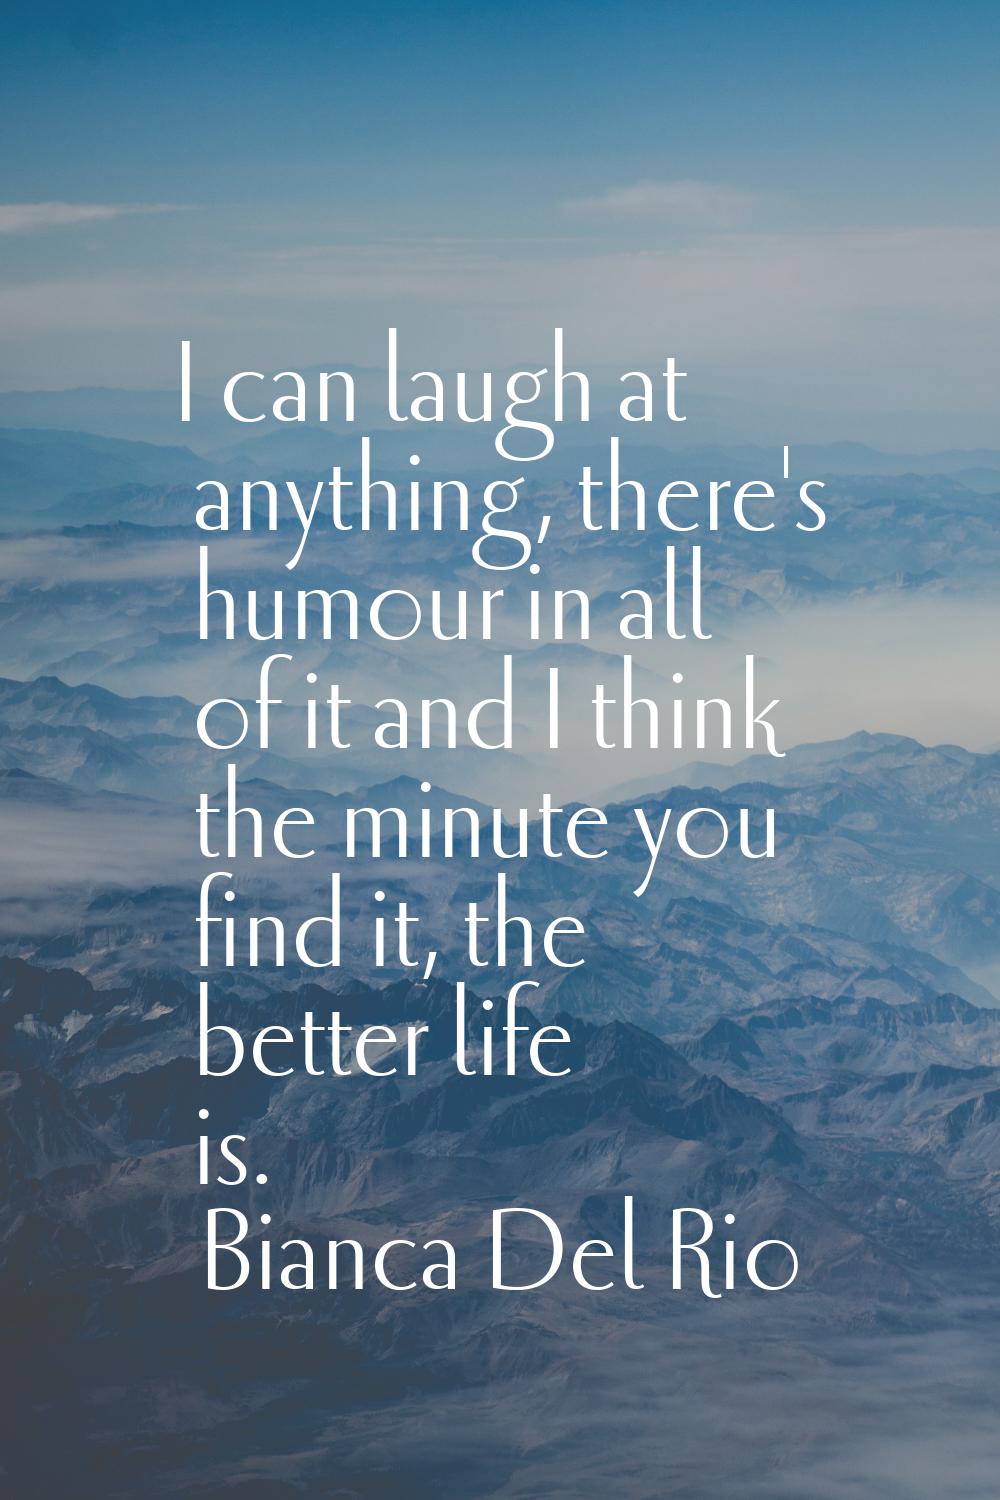 I can laugh at anything, there's humour in all of it and I think the minute you find it, the better